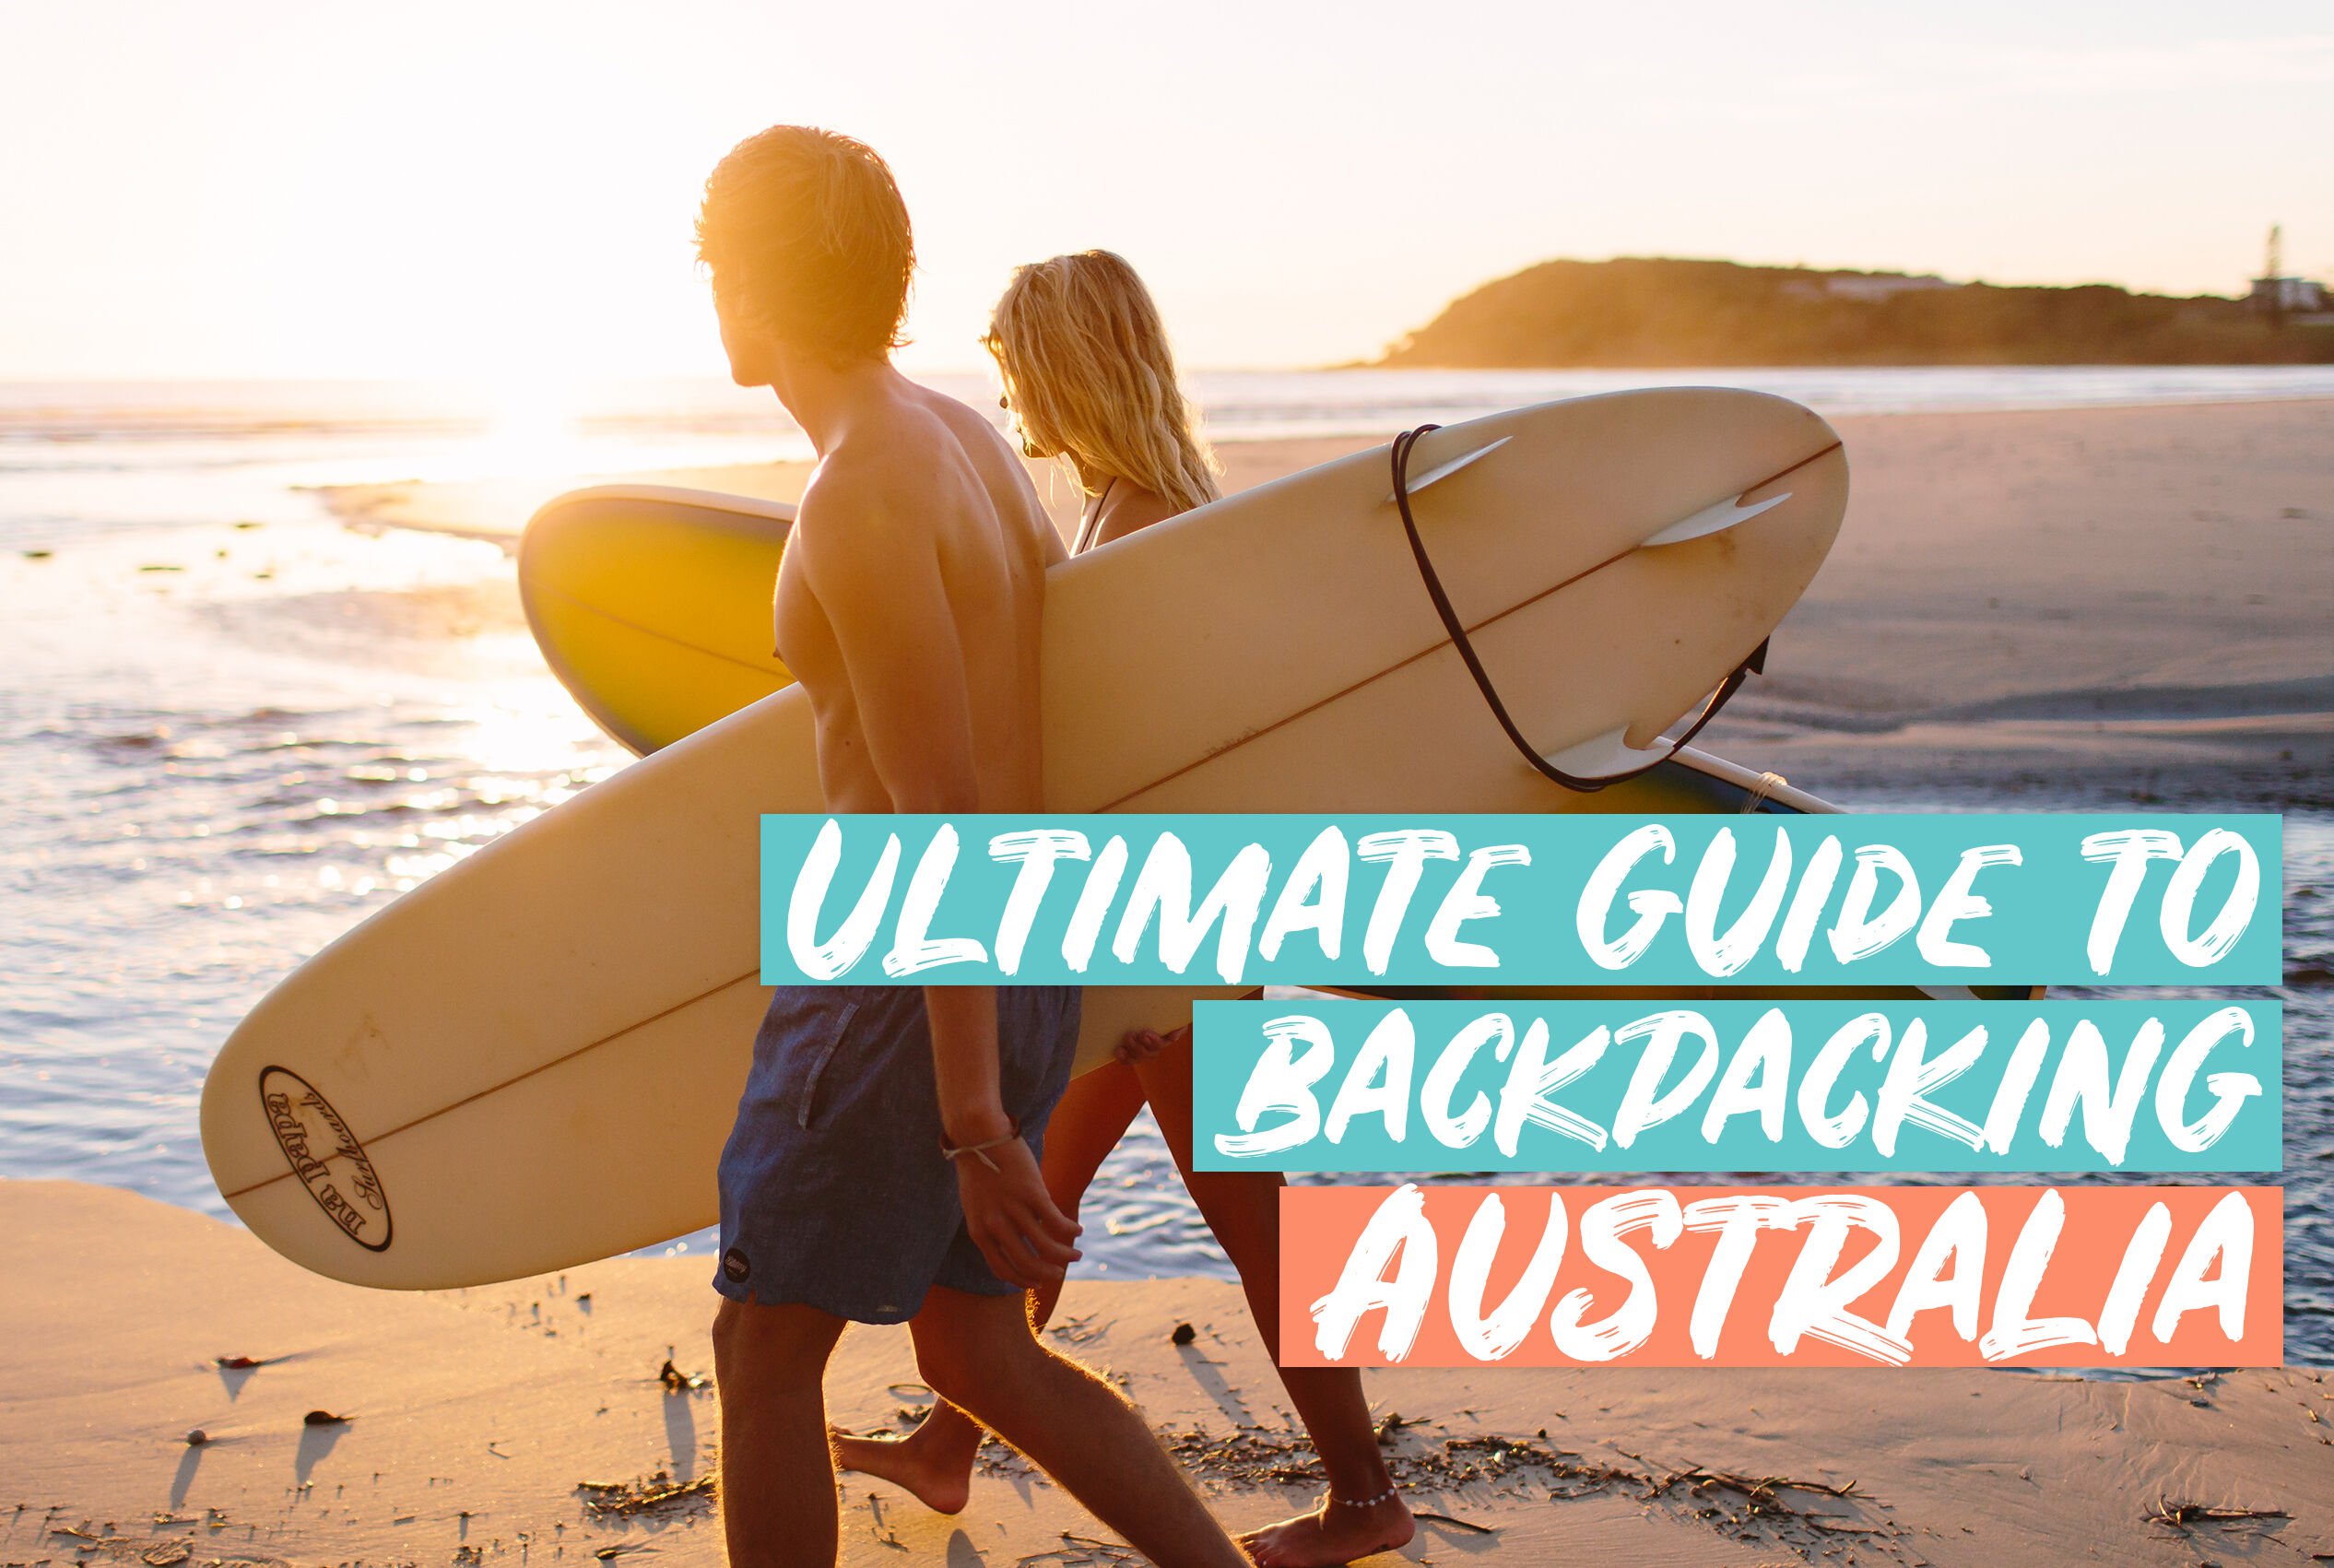 The Ultimate Guide To Byron Bay, Australia